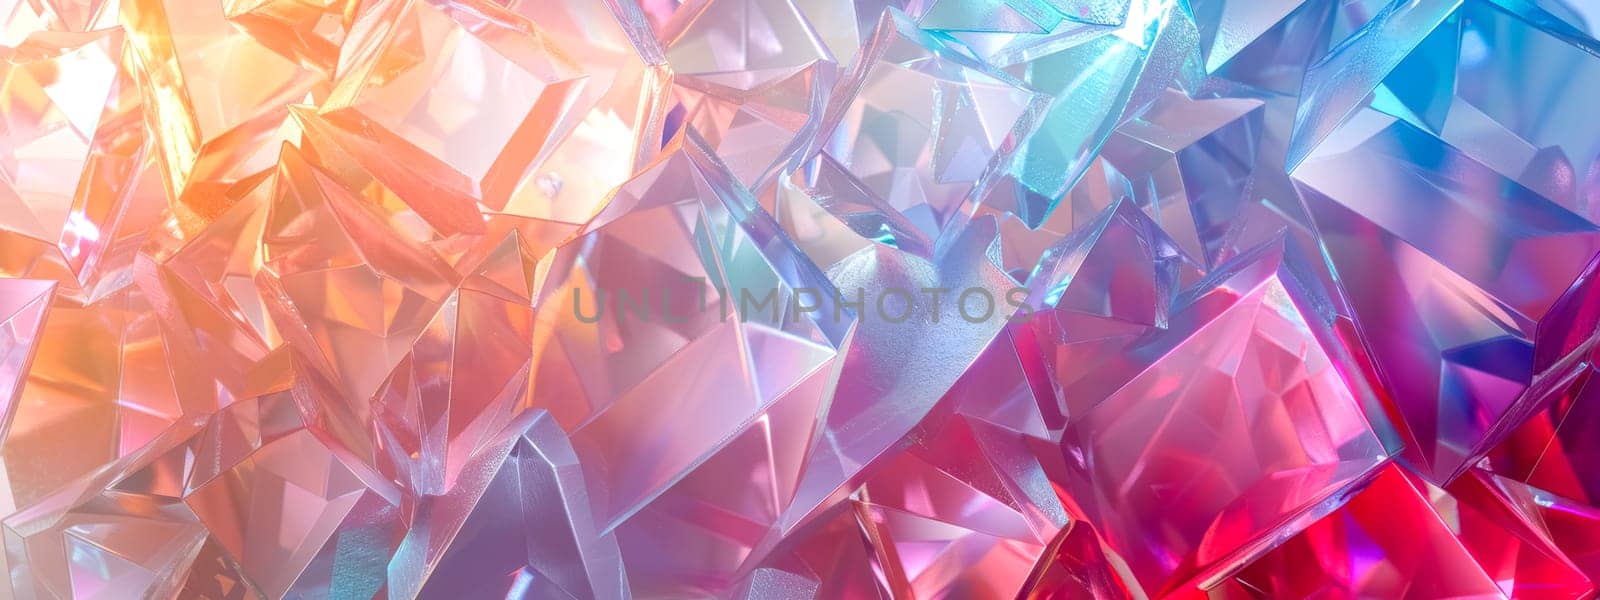 Panoramic view of vibrant crystal shapes in a dynamic colorful gradient by Edophoto